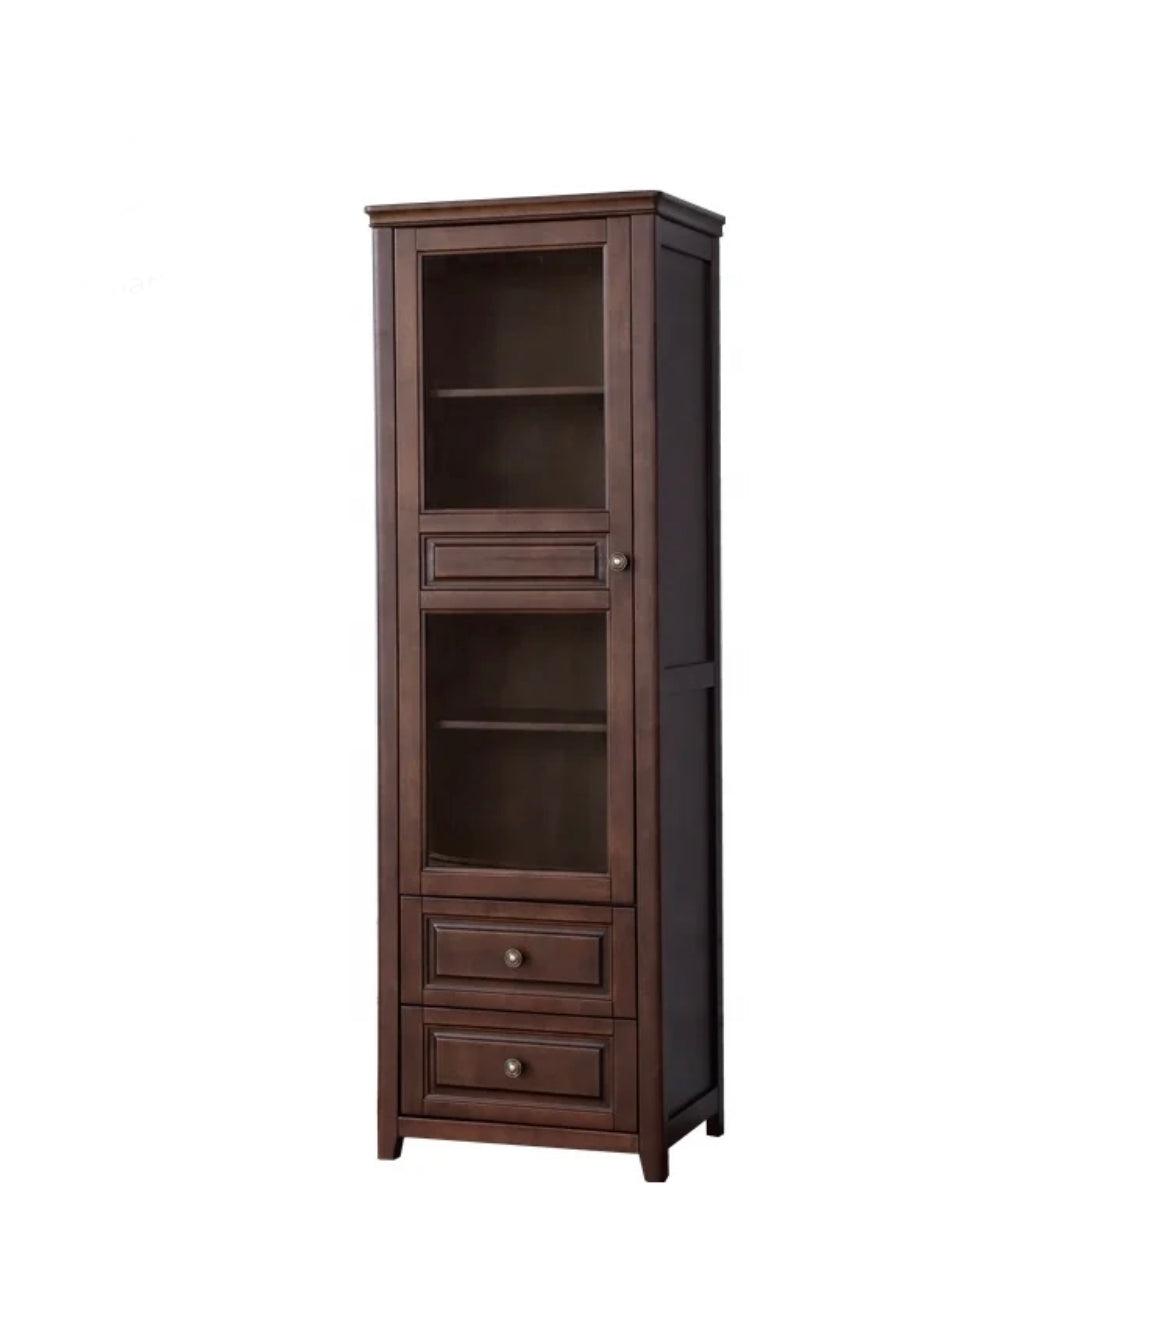 Cabinets American Rural Style Storable Living Room Furniture Solid Wood Cabinets